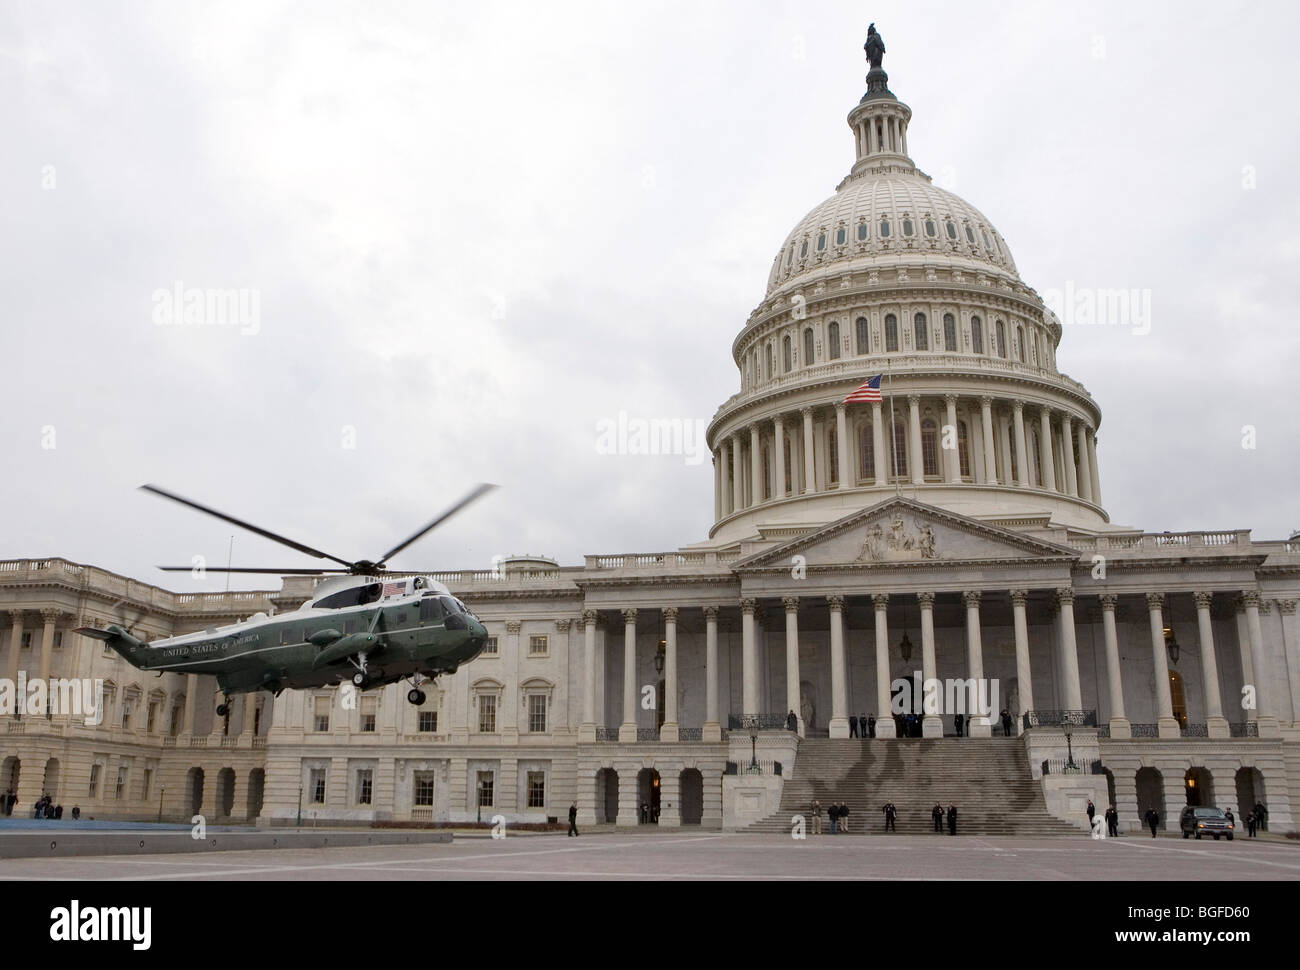 A Marine One helicopter practices a landing at the US Capitol Building. Stock Photo